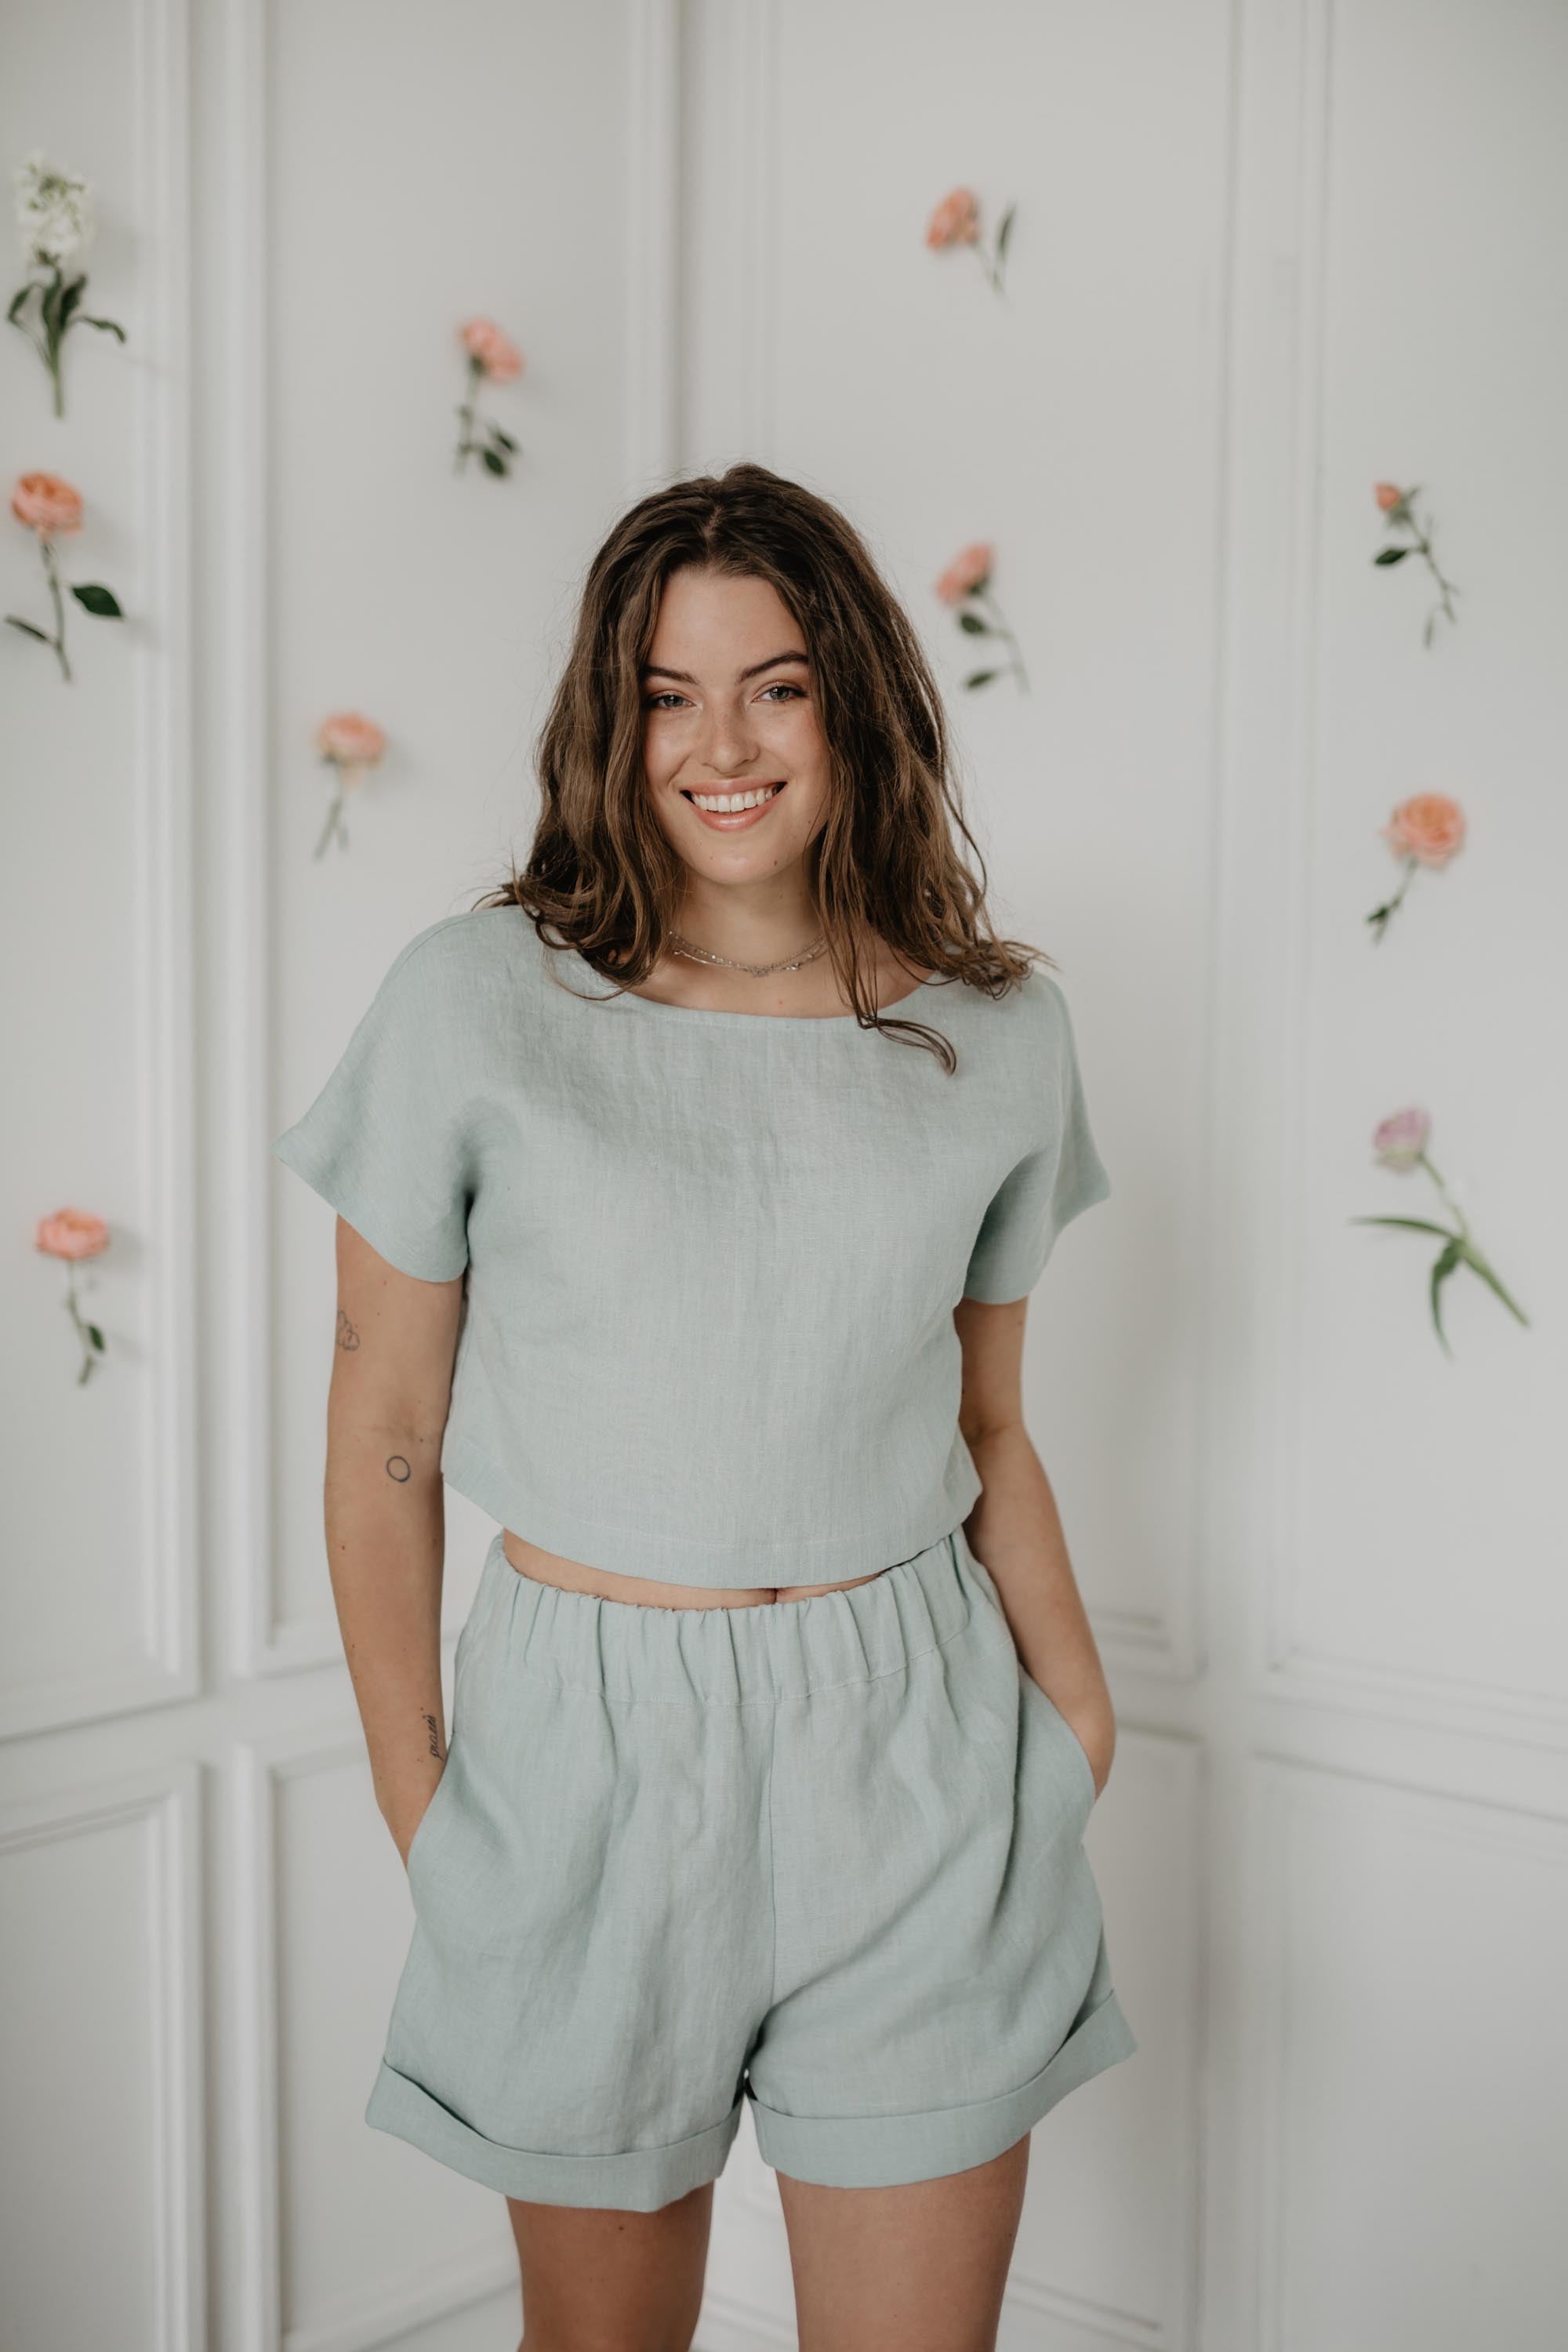 Woman Wearing Sage Green Linen Shorts And Sage Green Linen Top